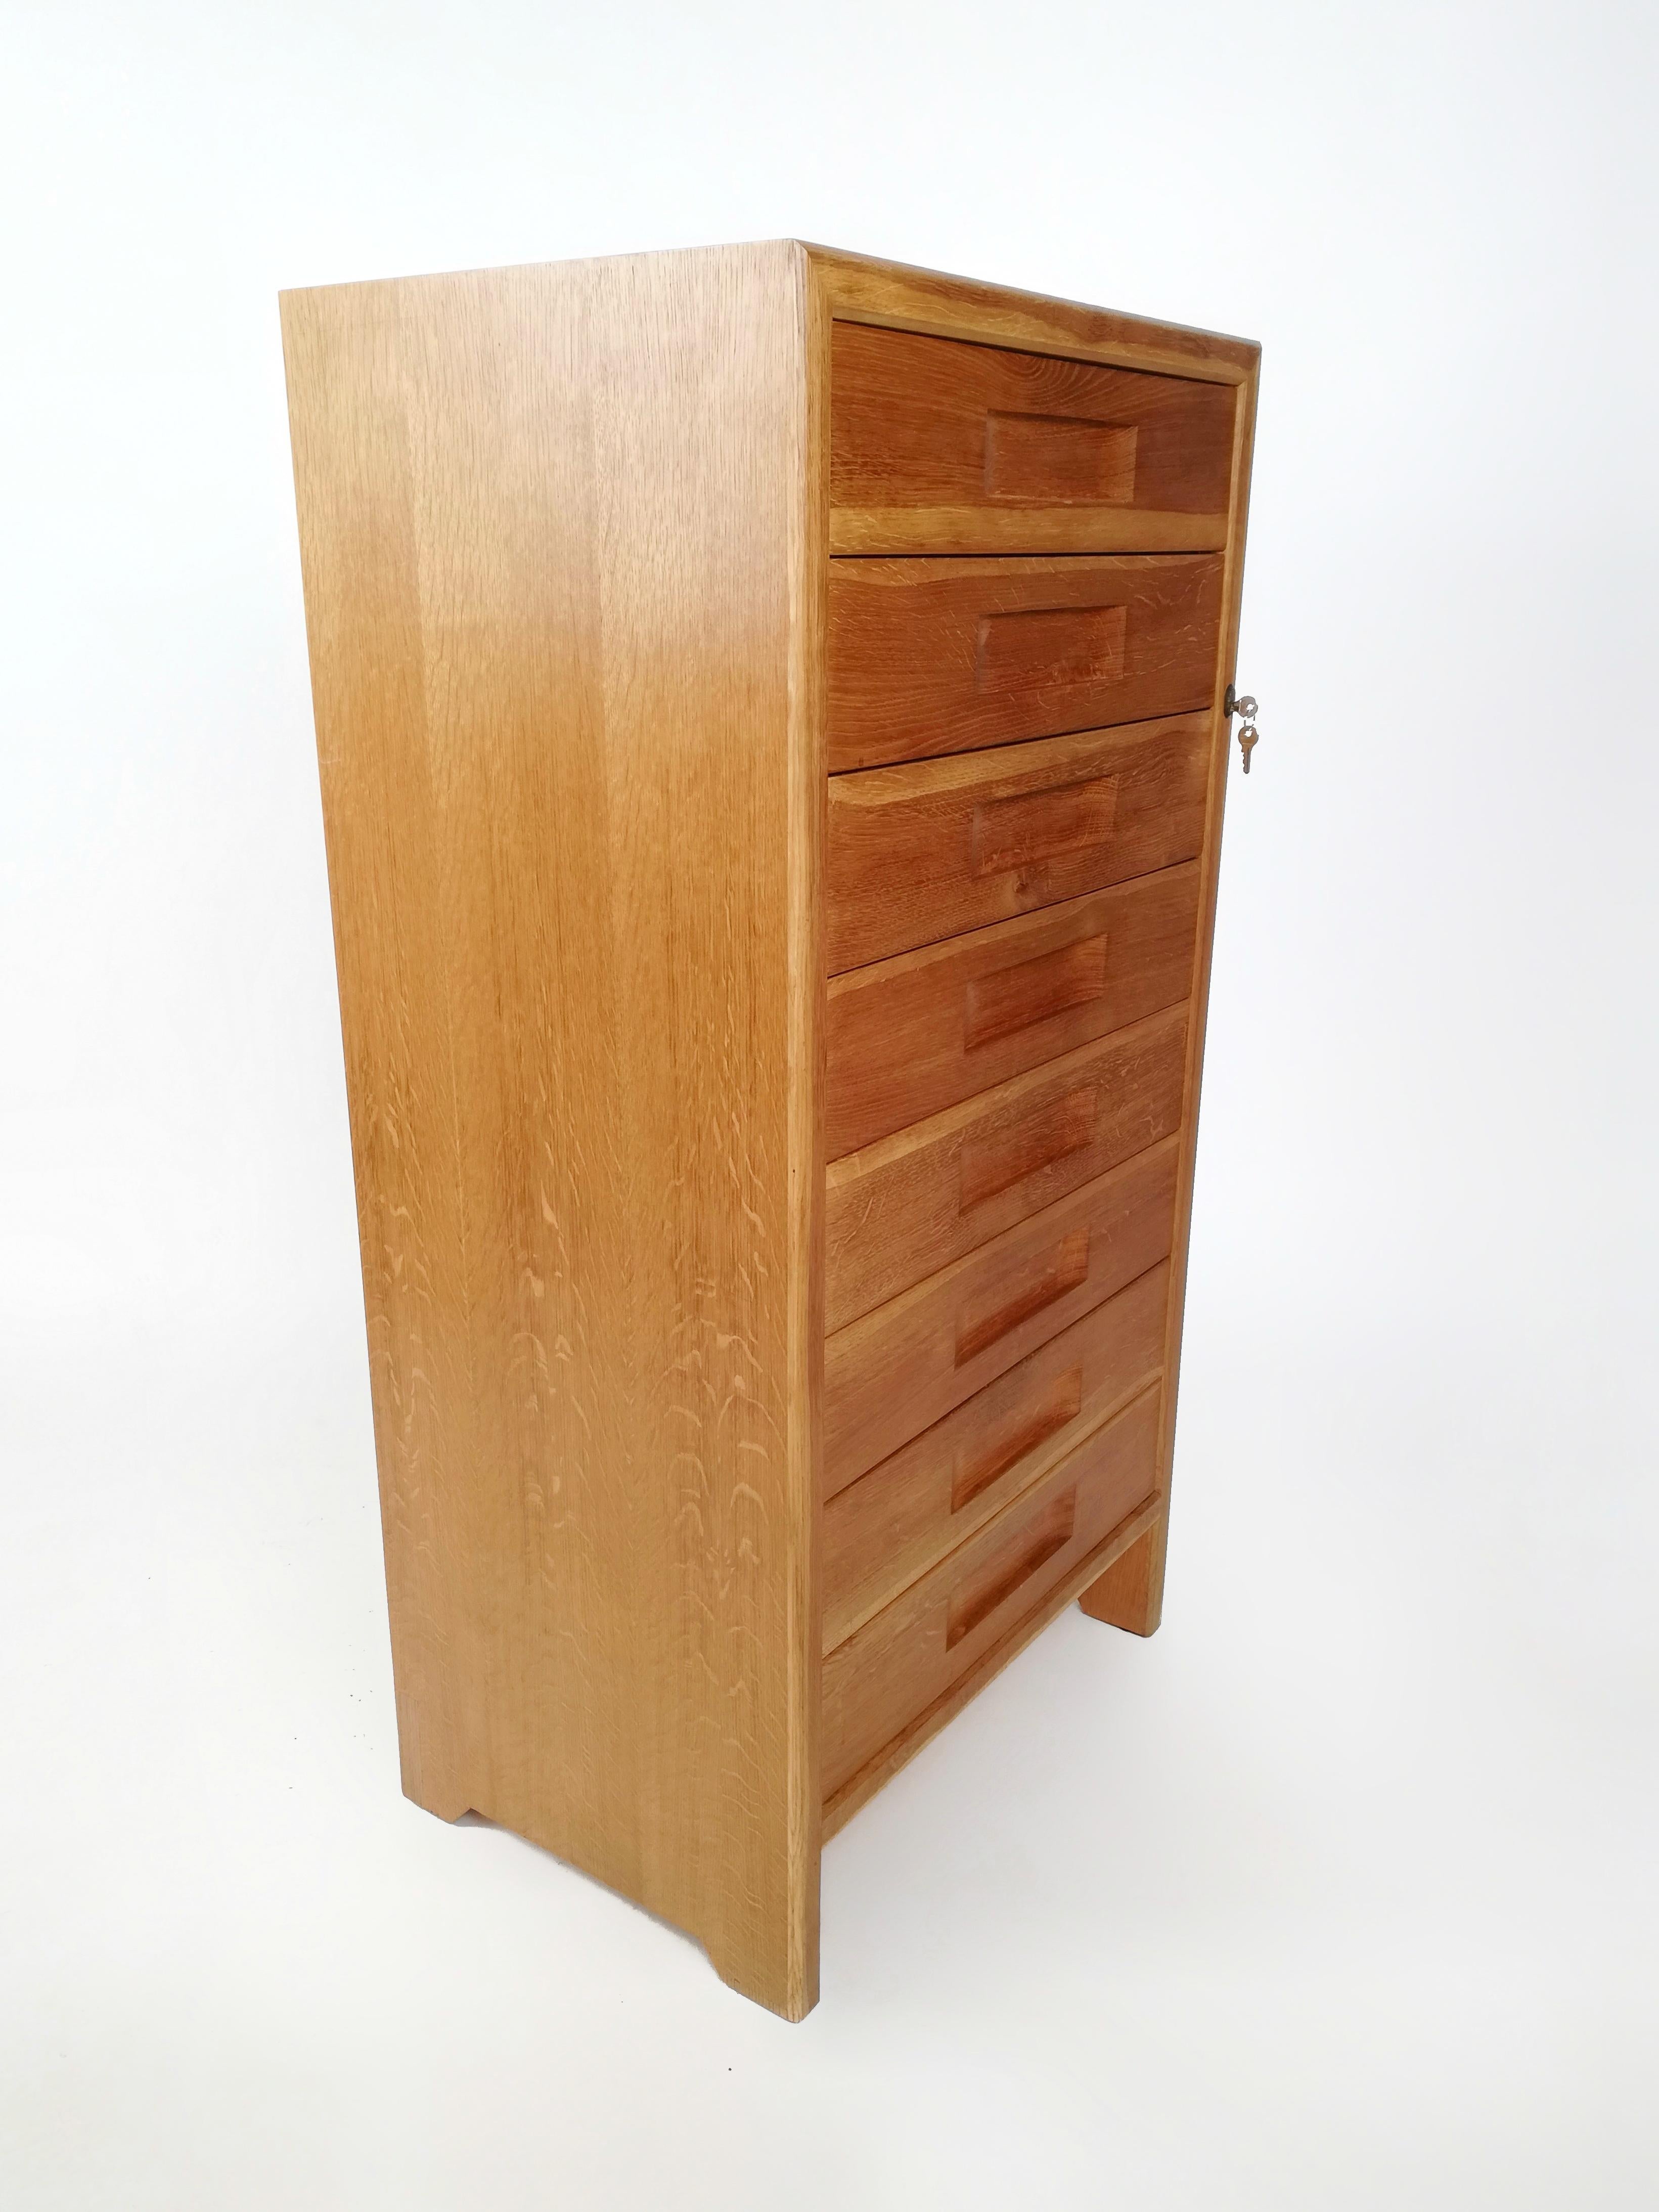 Italian Vintage Oak and Birch Wood Office Tallboy Chest of Drawers, 1960s For Sale 13